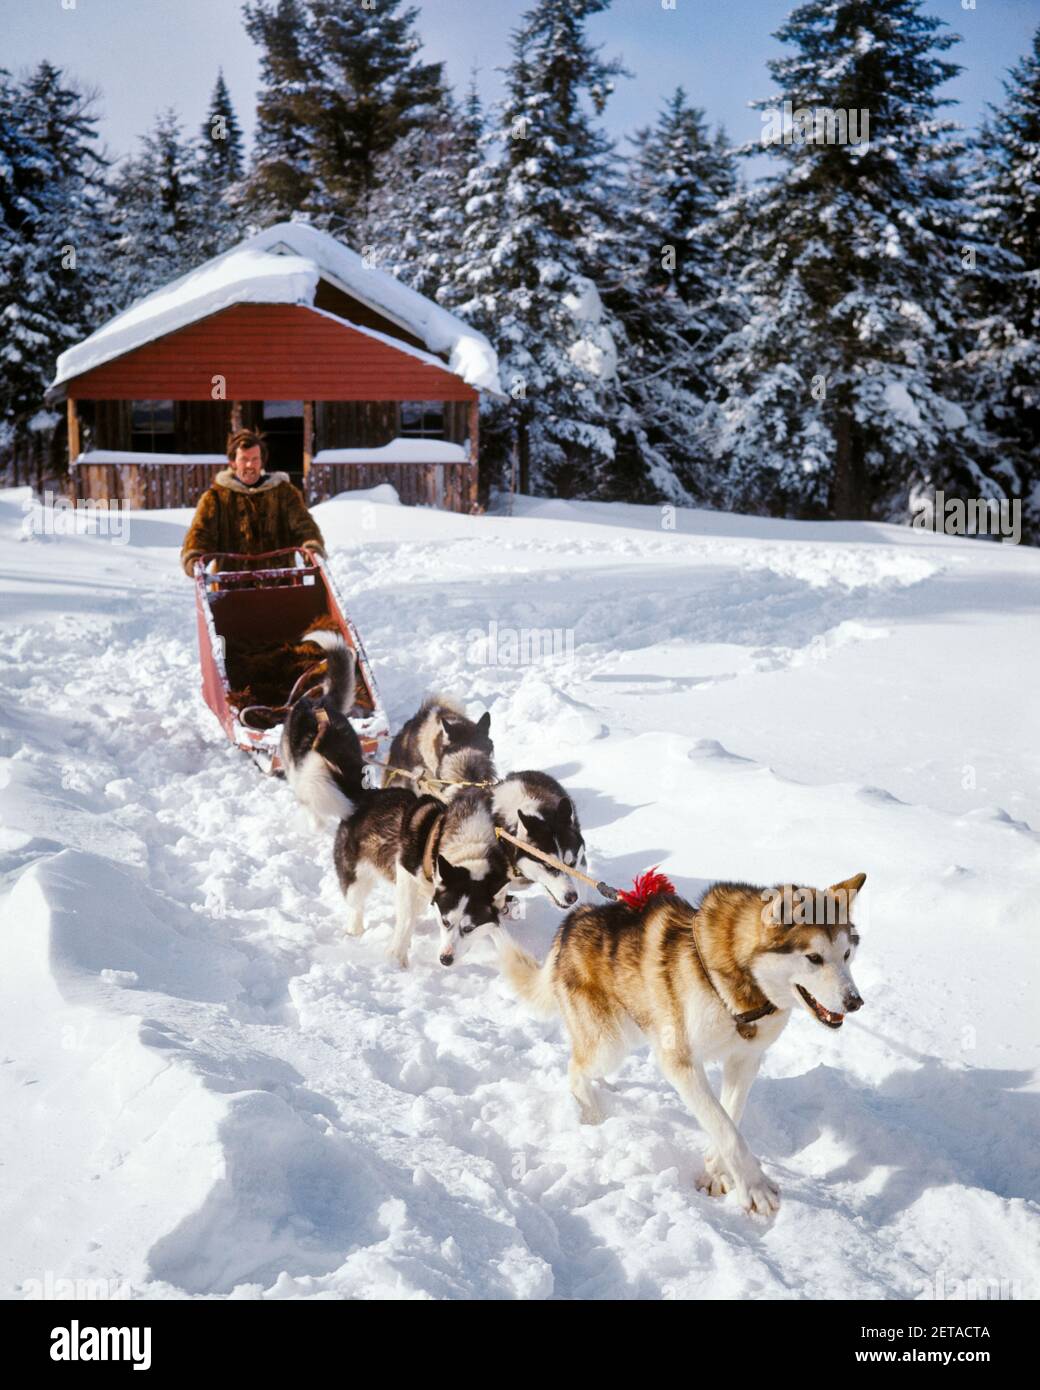 1970s MAN A MUSHER RIDING A DOG SLED IN WINTER SNOW 5 HUSKIES DOGS PULLING THE SLED BUILDING SKI CHALET CABIN IN BACKGROUND - kw3979 HAR001 HARS TRANSPORTATION WINTERTIME FREEDOM MAMMALS ADVENTURE PROPERTY STRENGTH CANINES EXCITEMENT LEADERSHIP RECREATION POOCH REAL ESTATE CONNECTION STRUCTURES WINTERY CANINE CHALET COOPERATION MAMMAL MID-ADULT MID-ADULT MAN MUSHER MUSHING TOGETHERNESS CAUCASIAN ETHNICITY HAR001 OLD FASHIONED Stock Photo